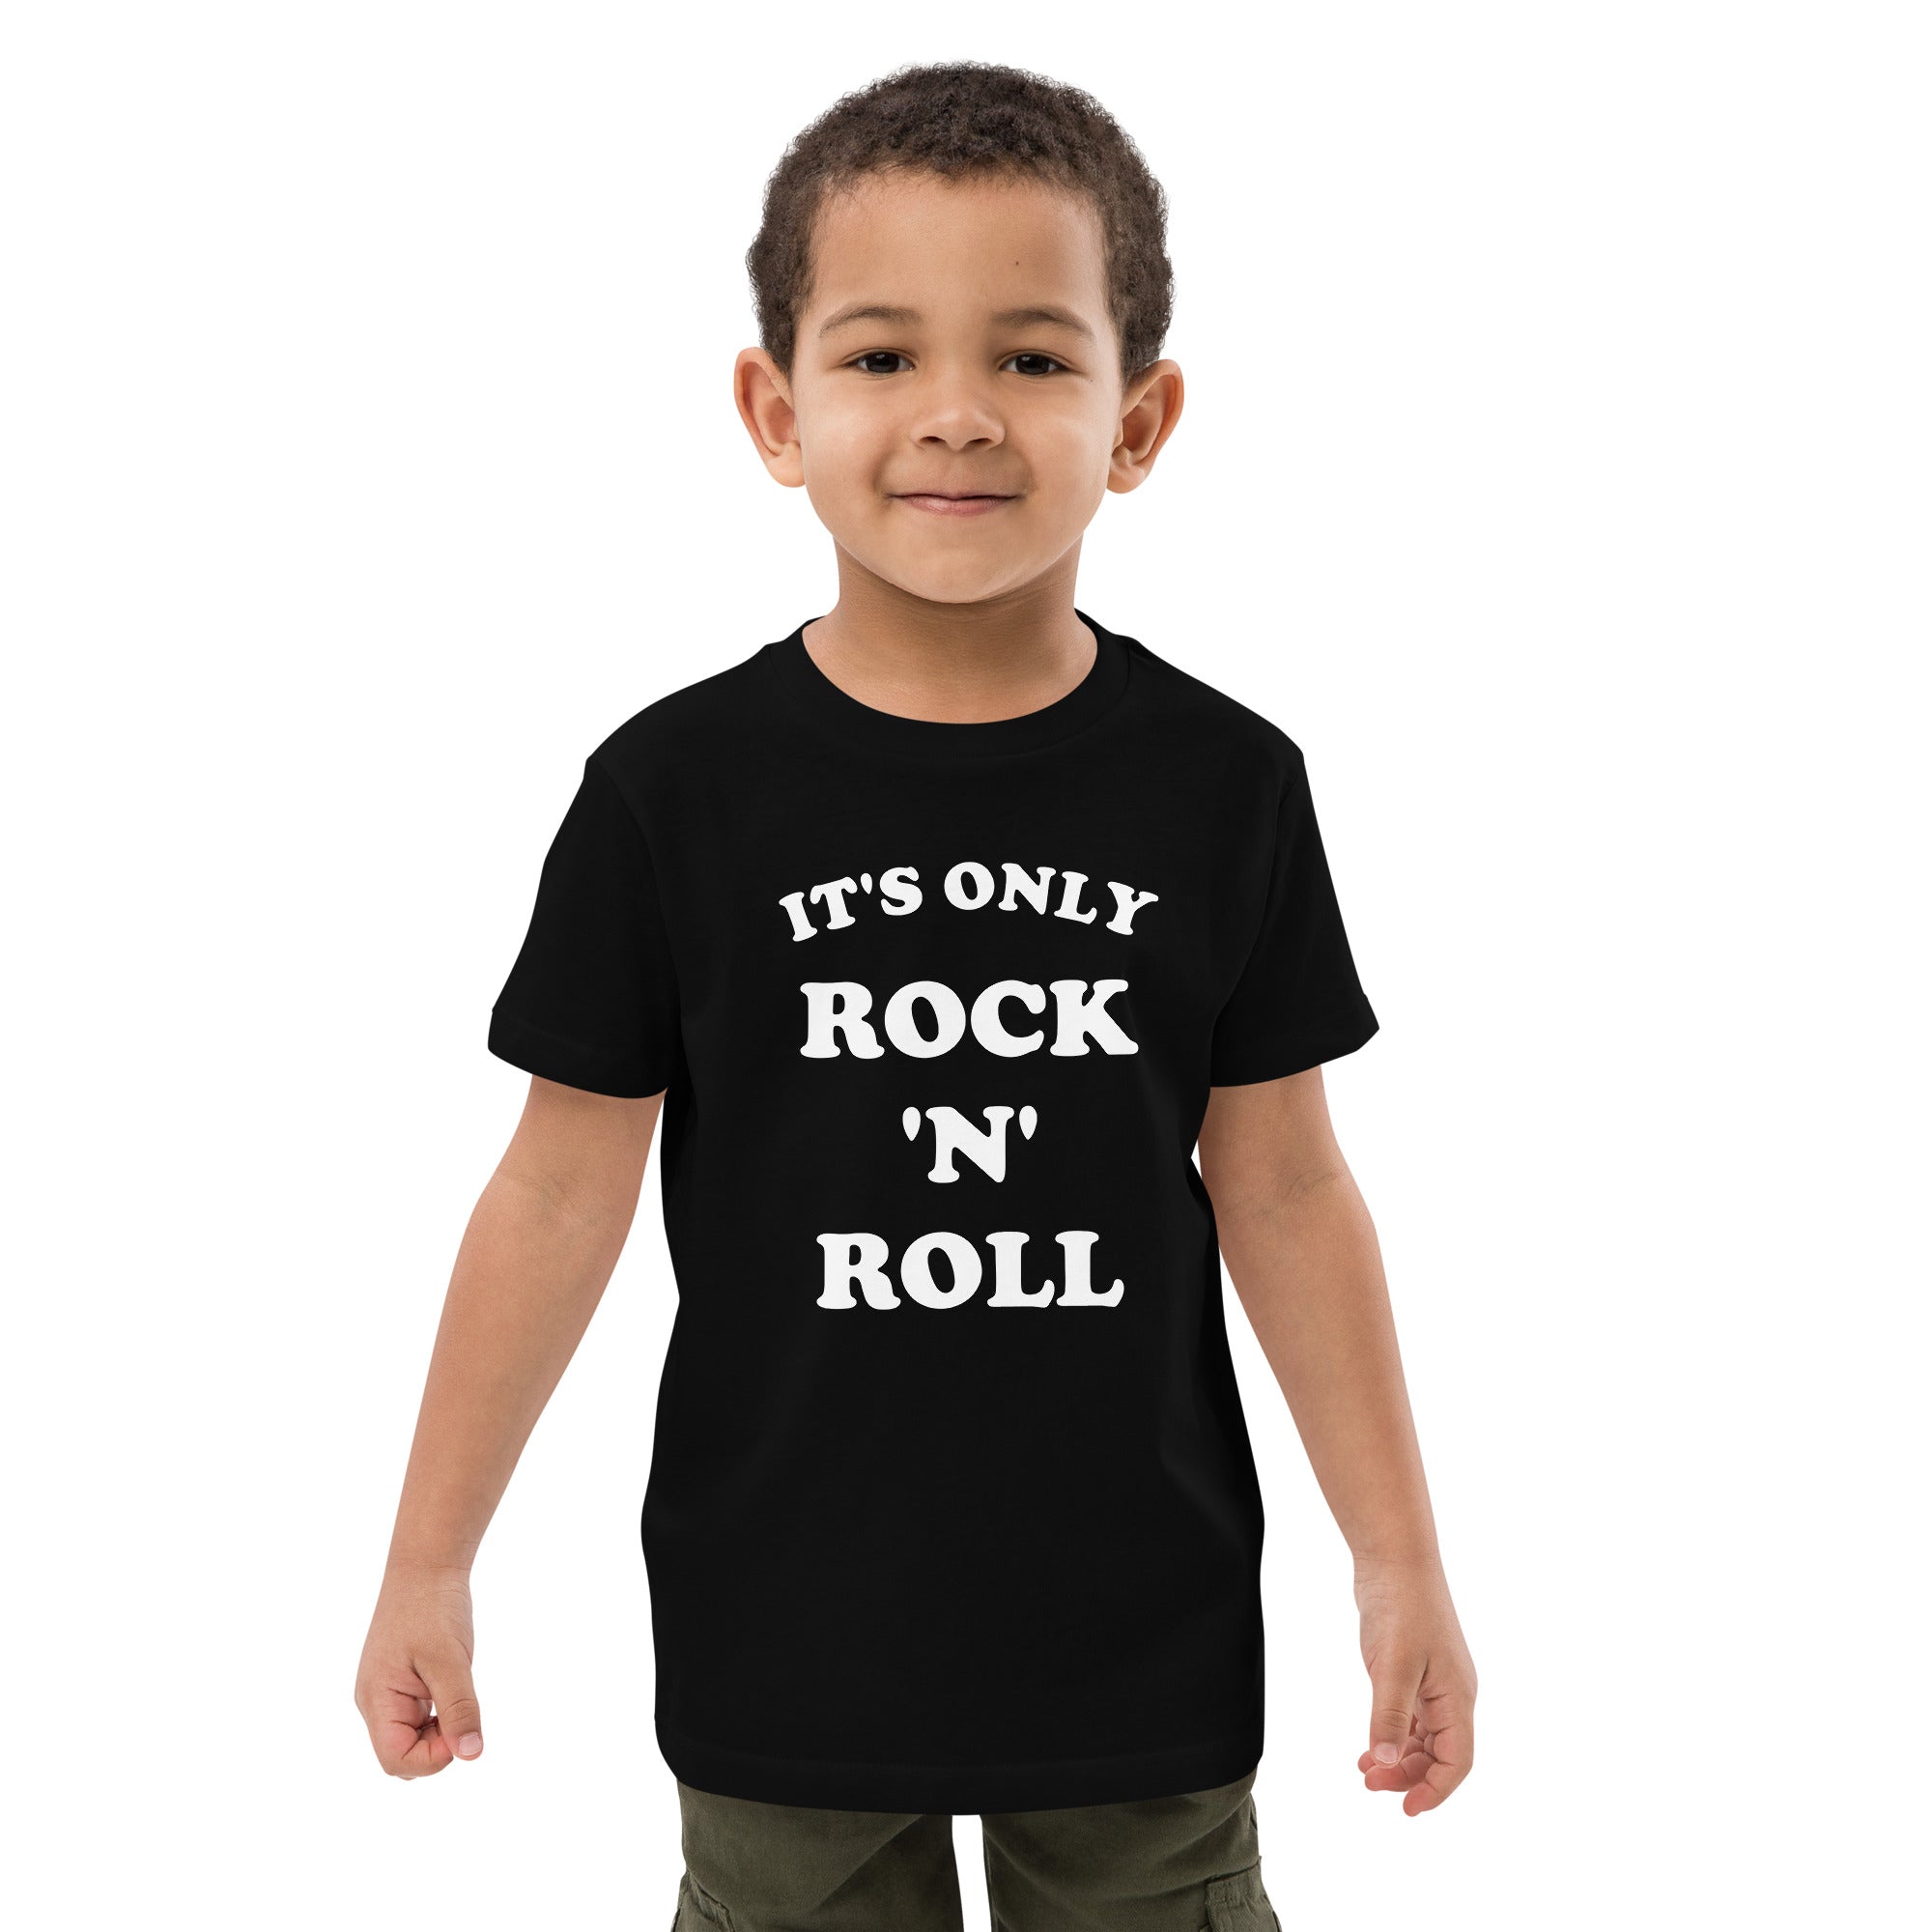 IT'S ONLY ROCK 'N' ROLL (BUT I LIKE IT) Front & Back Printed Organic Cotton Kids T-shirt